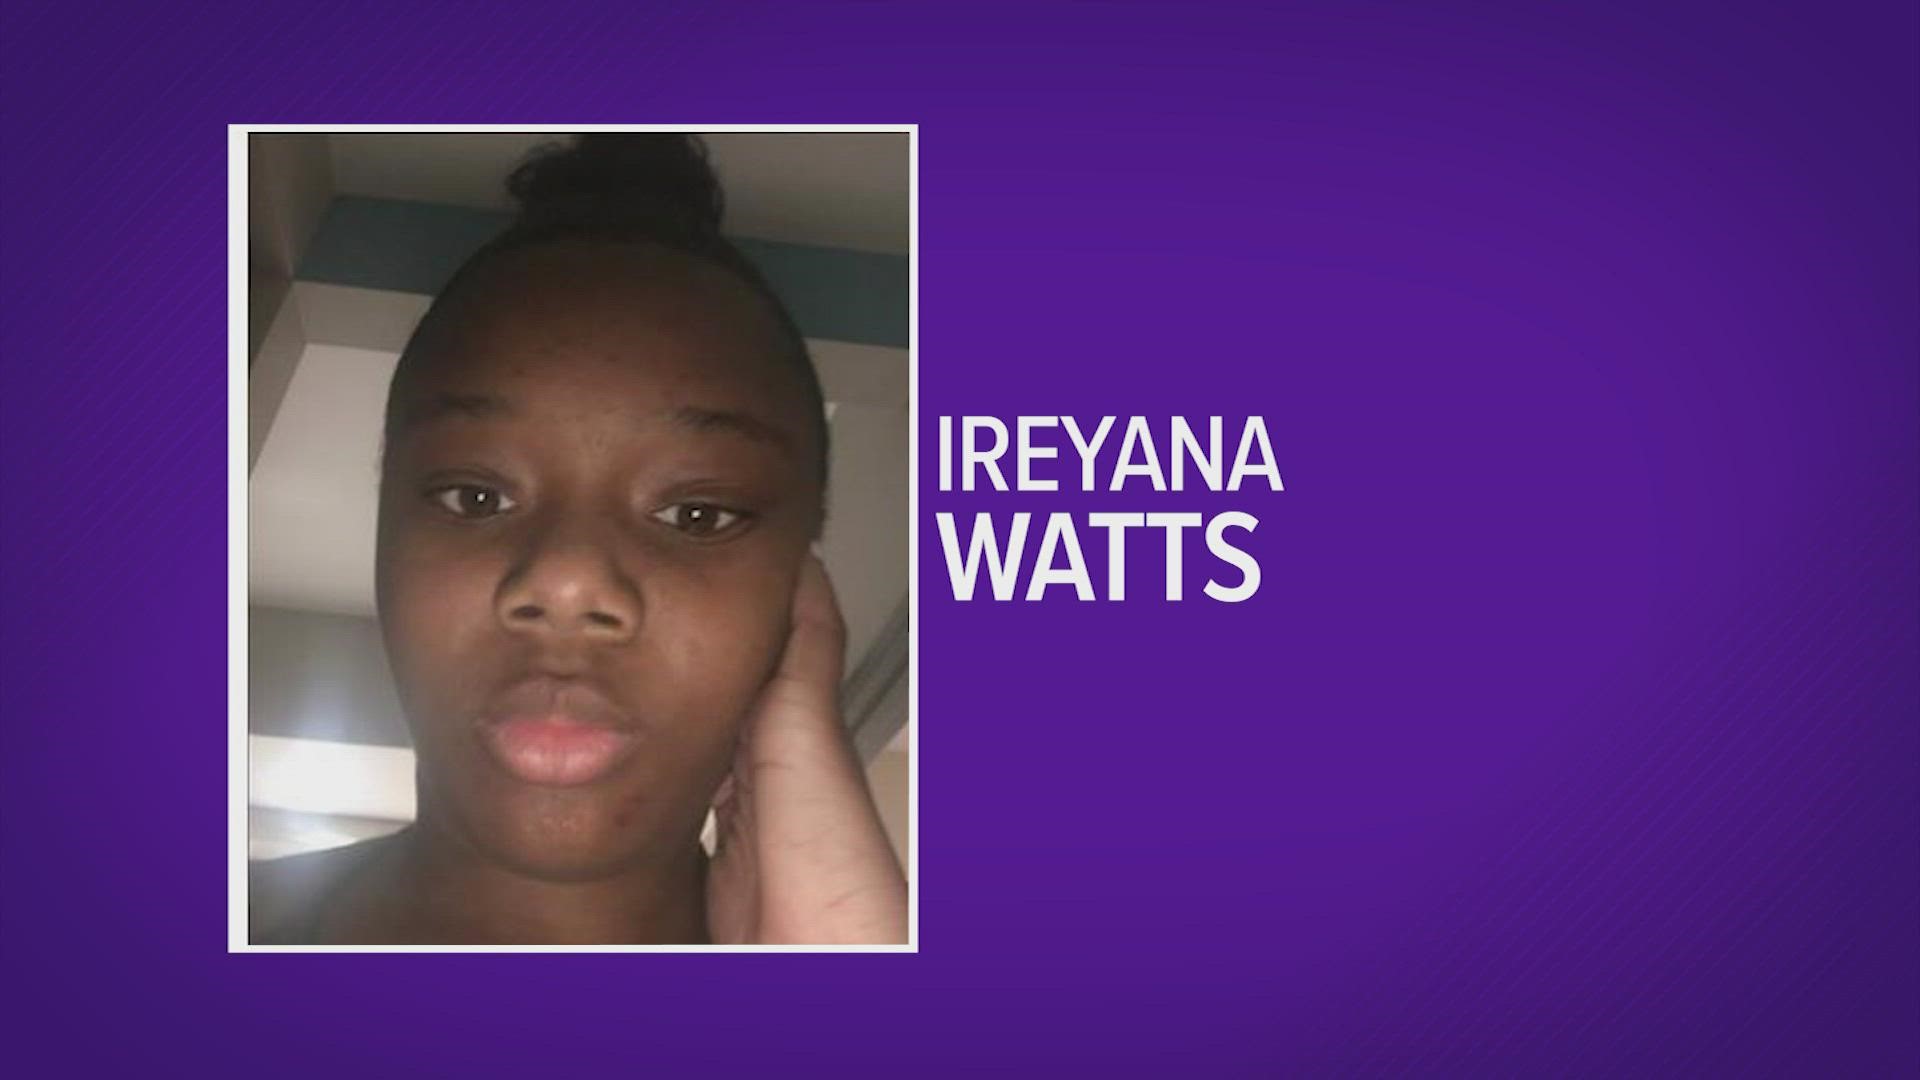 Ireyana Watts was last seen on Dec 19. Anyone with information on her whereabouts should call the Houston Police Missing Persons Unit at 832-394-1840.